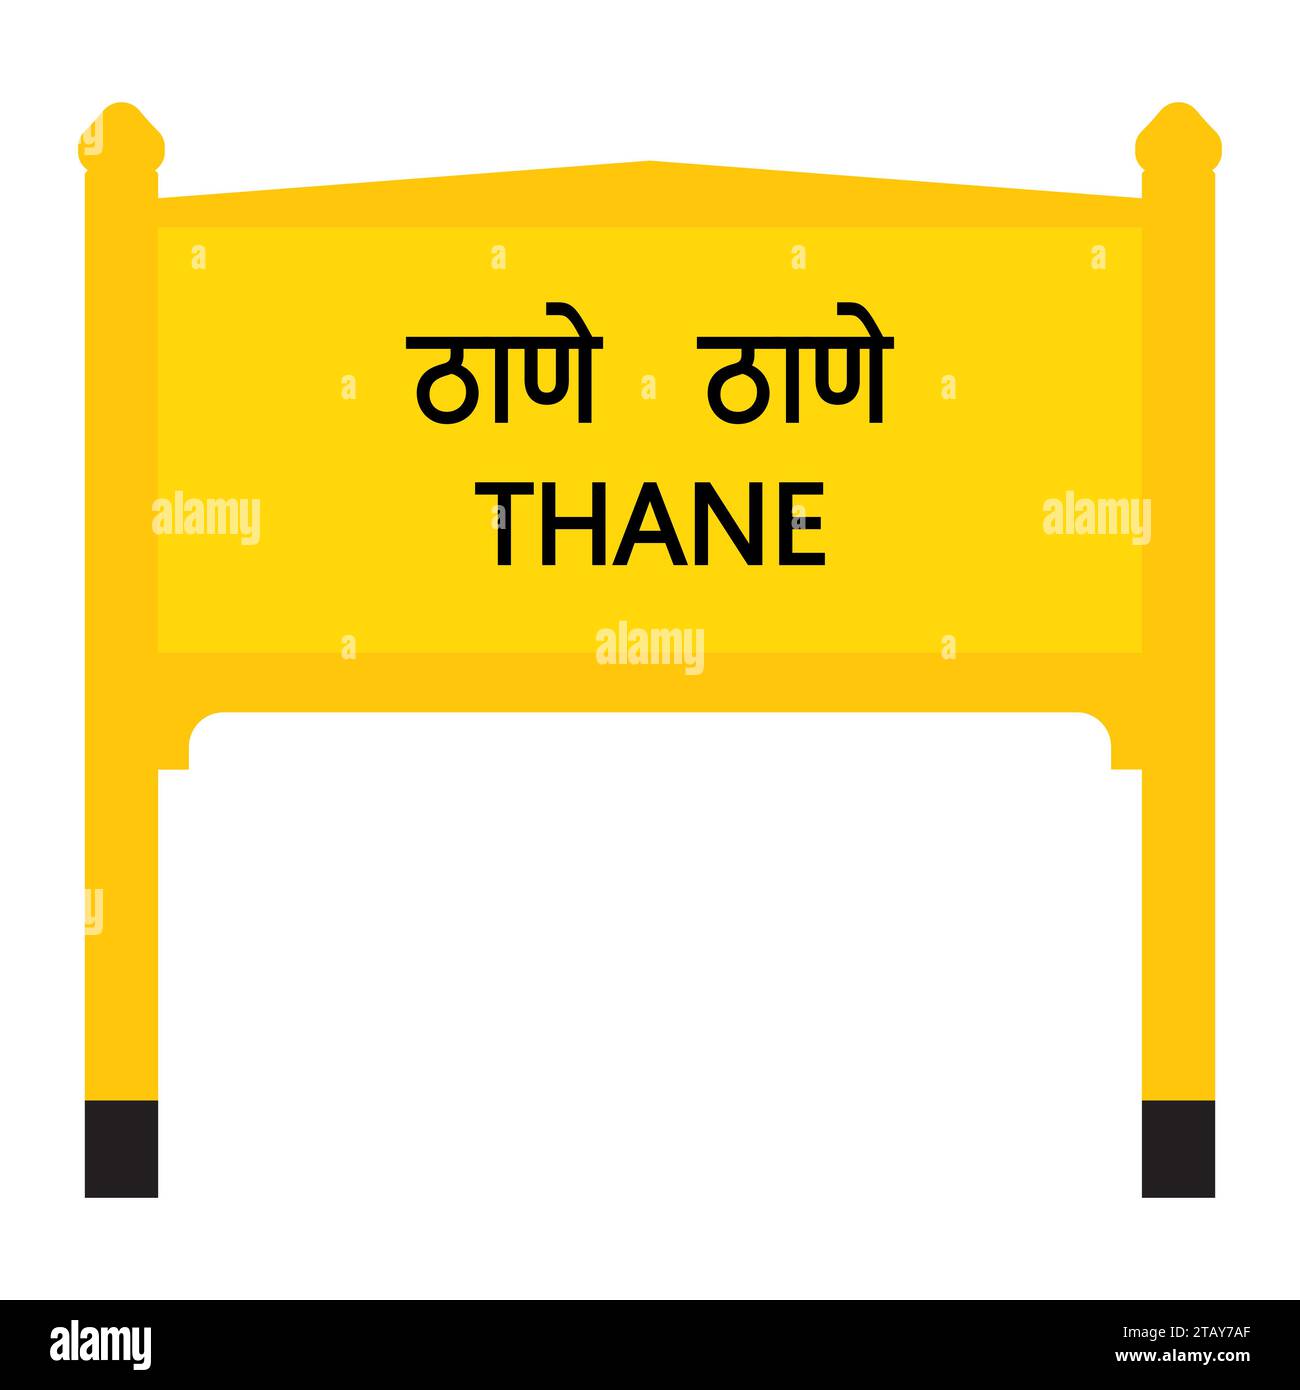 Thane junction railways name board isolated on white Stock Vector